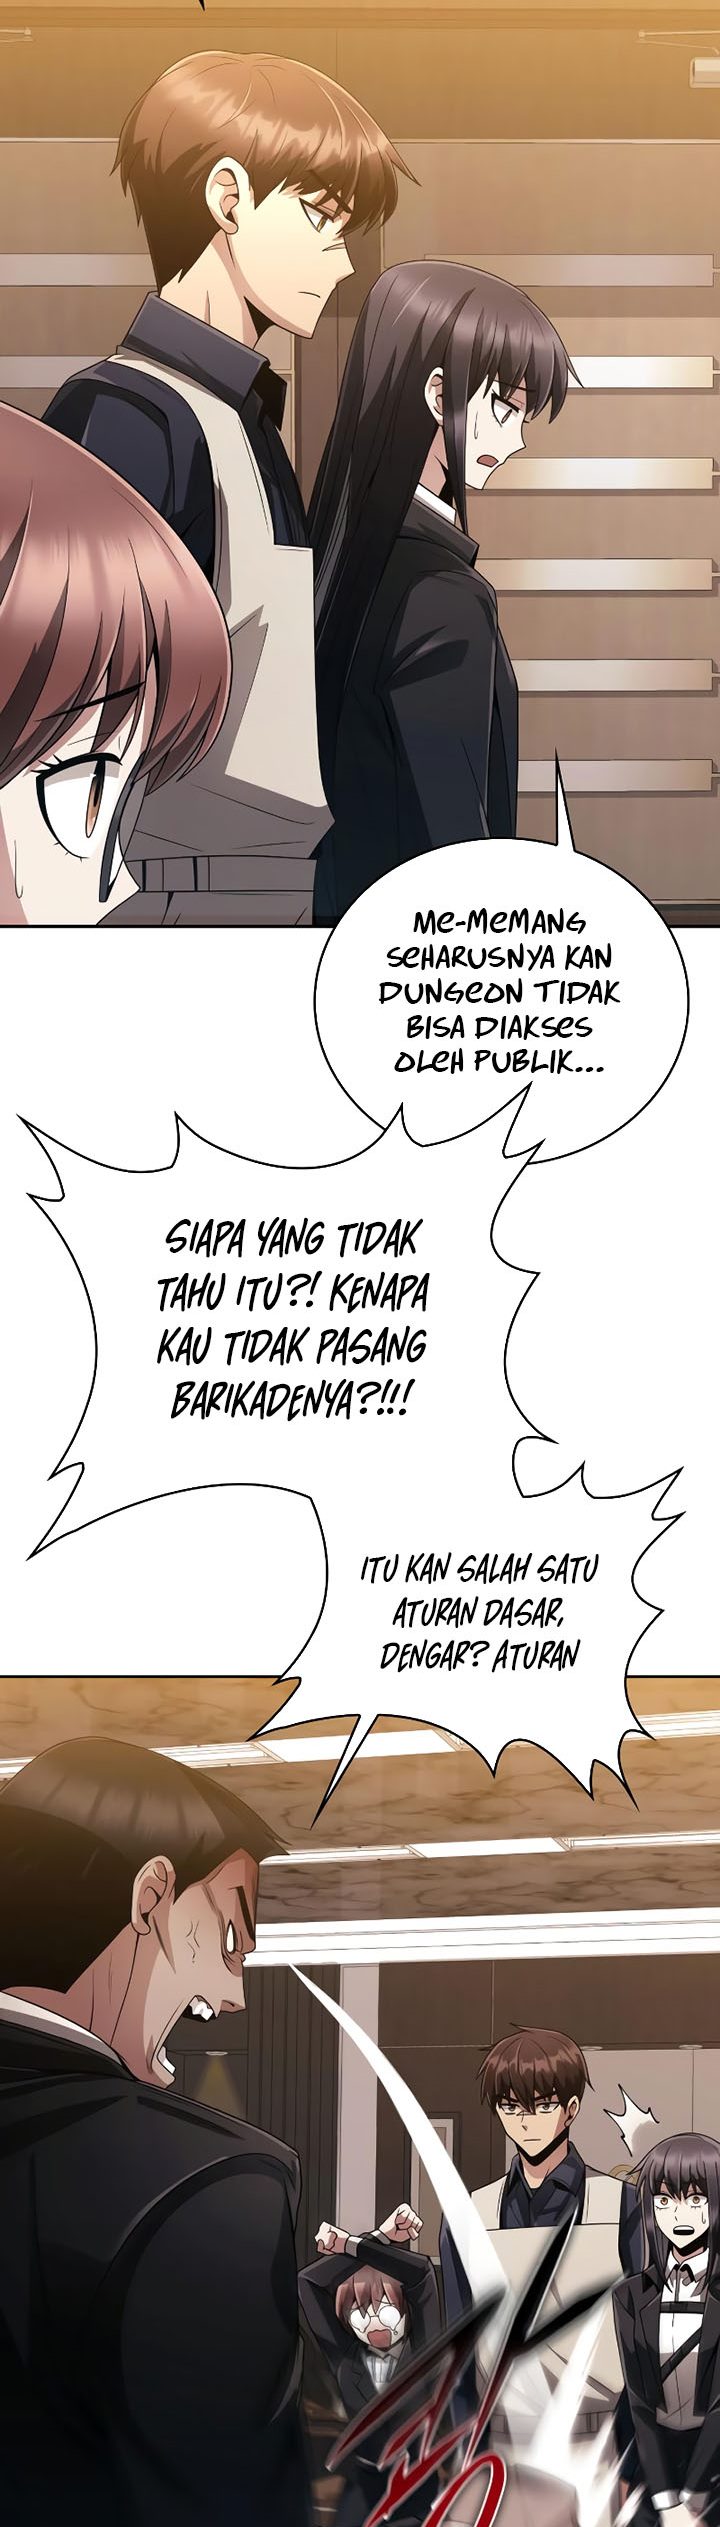 Dilarang COPAS - situs resmi www.mangacanblog.com - Komik clever cleaning life of the returned genius hunter 019 - chapter 19 20 Indonesia clever cleaning life of the returned genius hunter 019 - chapter 19 Terbaru 29|Baca Manga Komik Indonesia|Mangacan